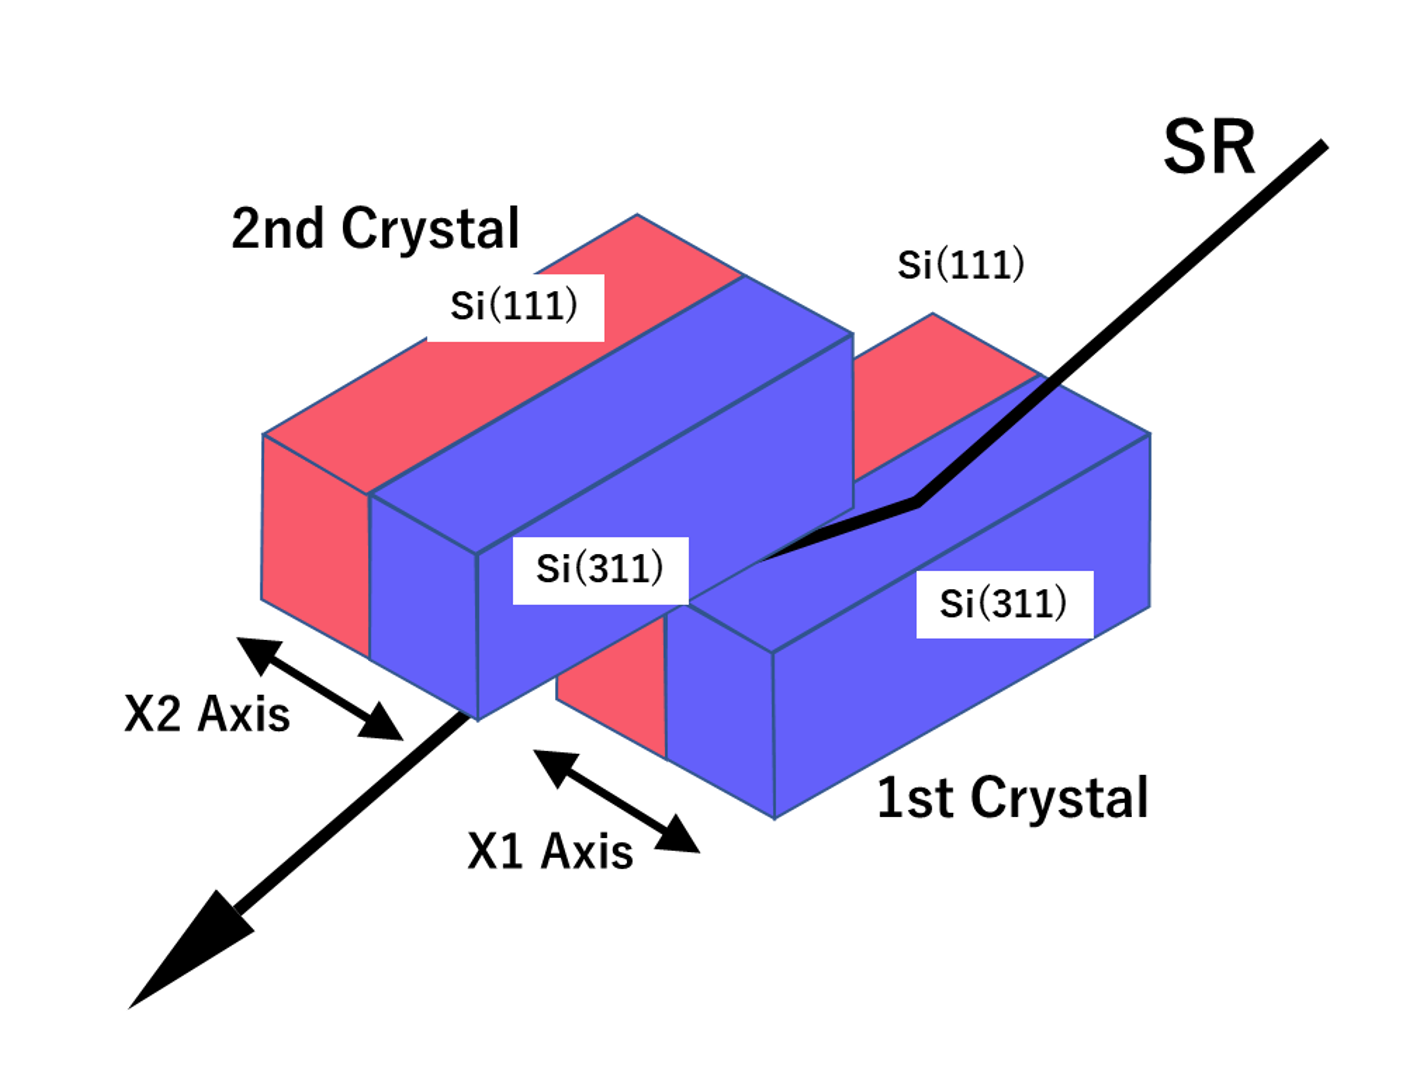 Principle of the multi-crystal switching system